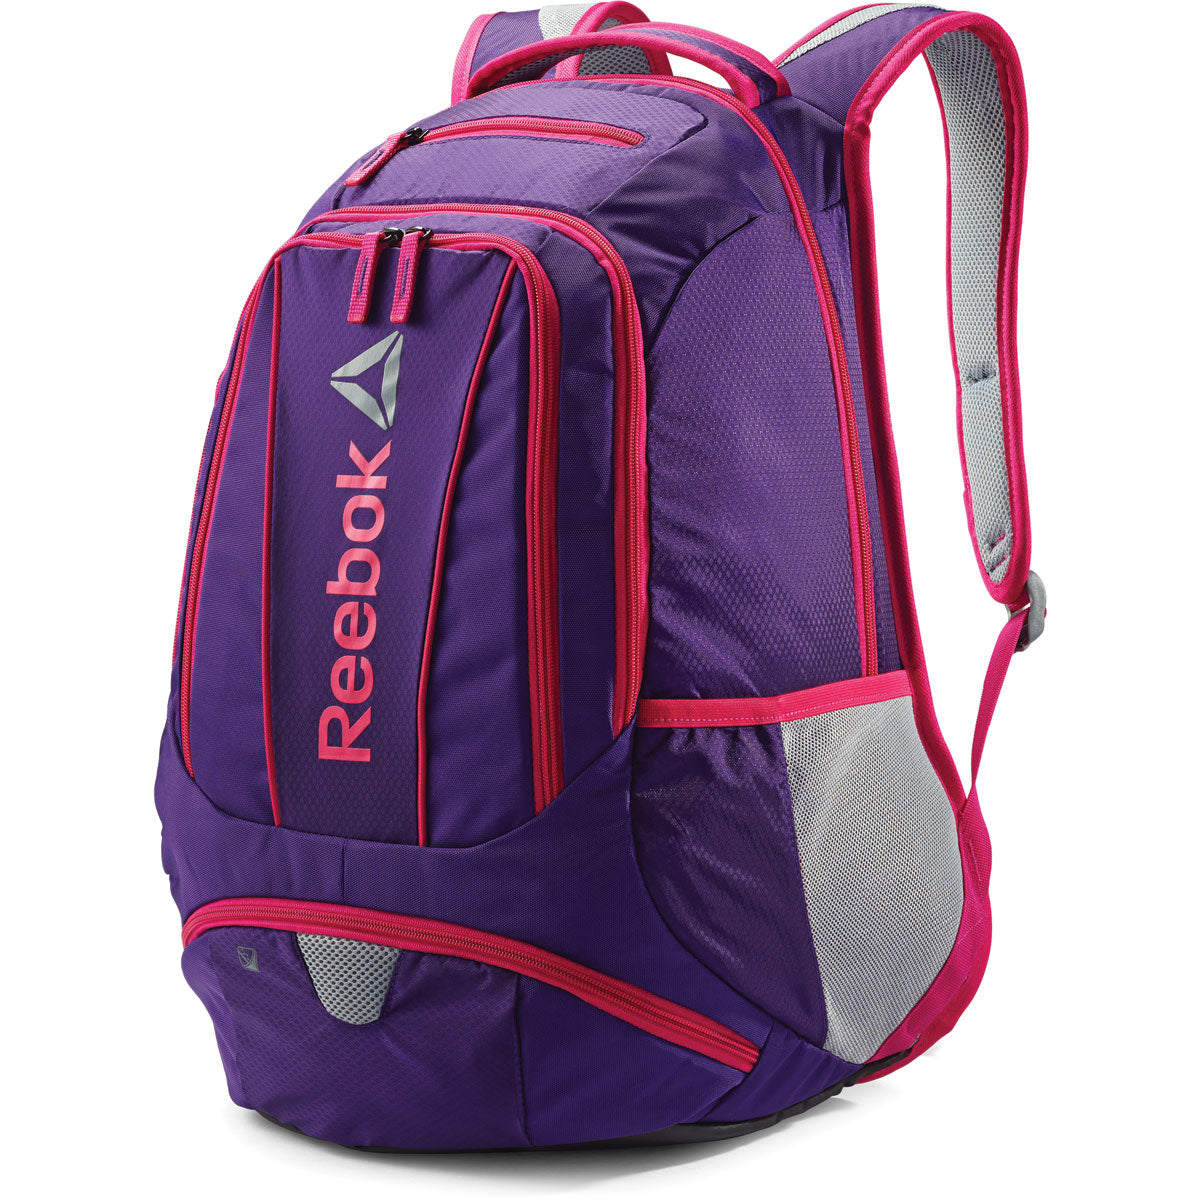 Shop Reebok Delta Core Statofortress Backpack – Luggage Factory